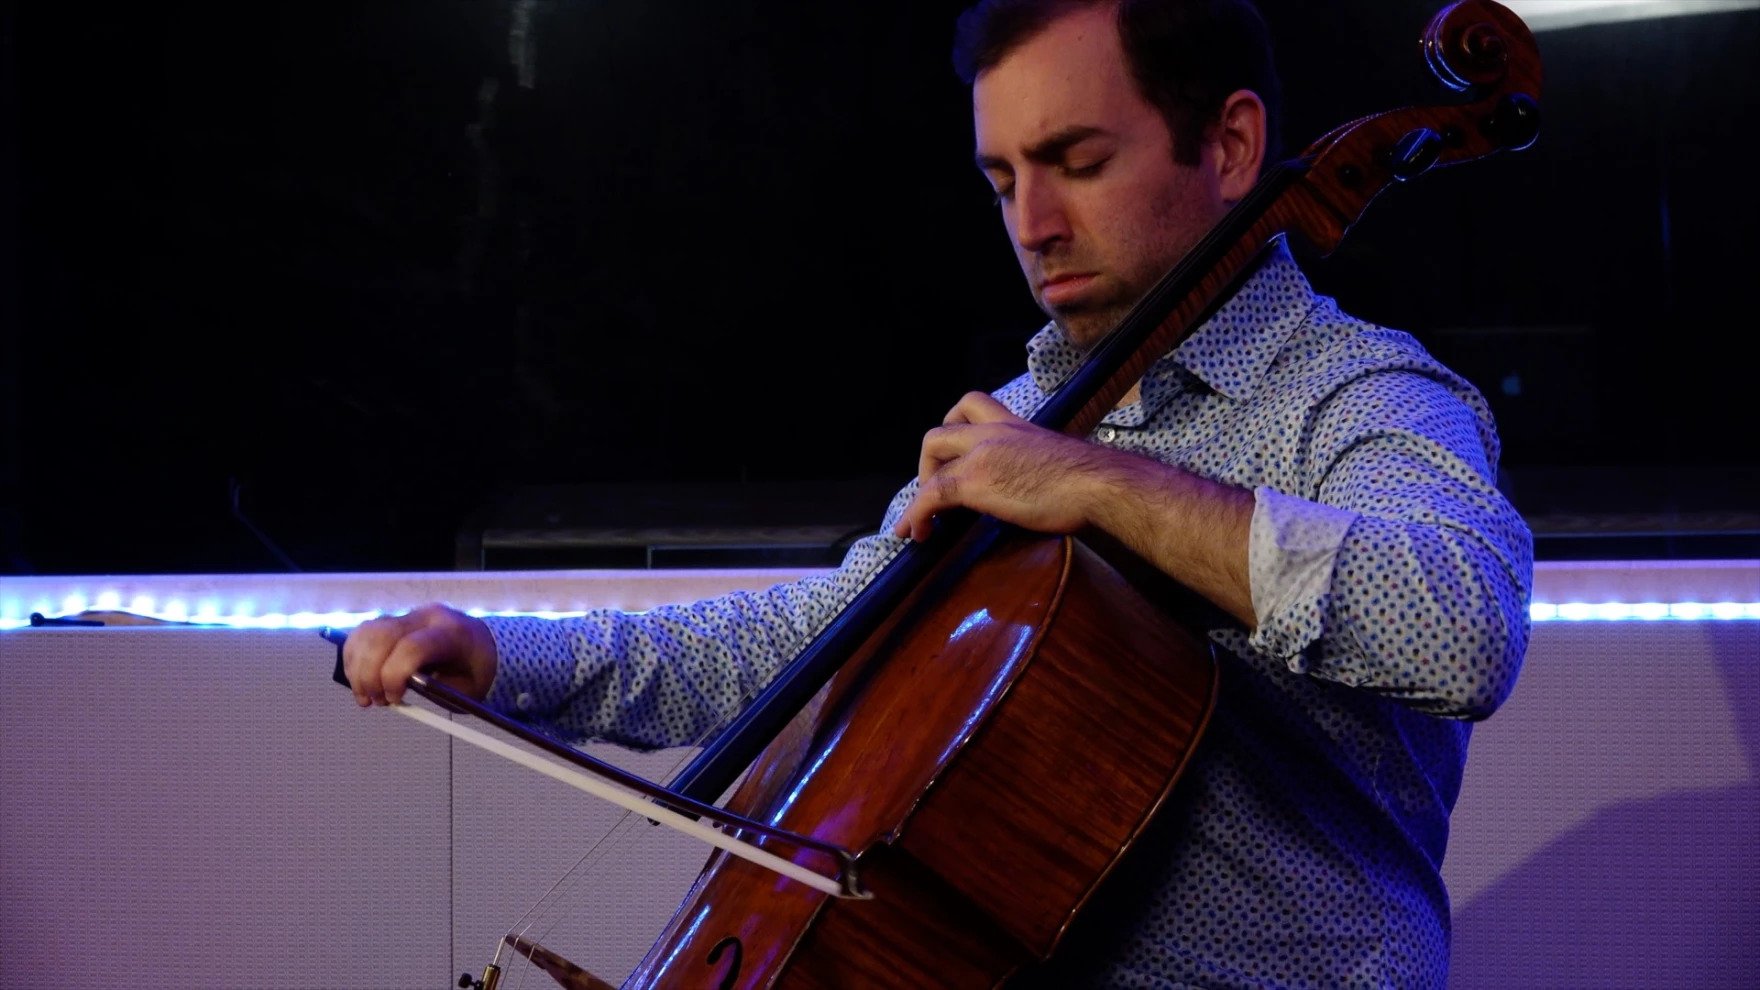 WRTI Presents ASTRAL Cellist Tommy Mesa